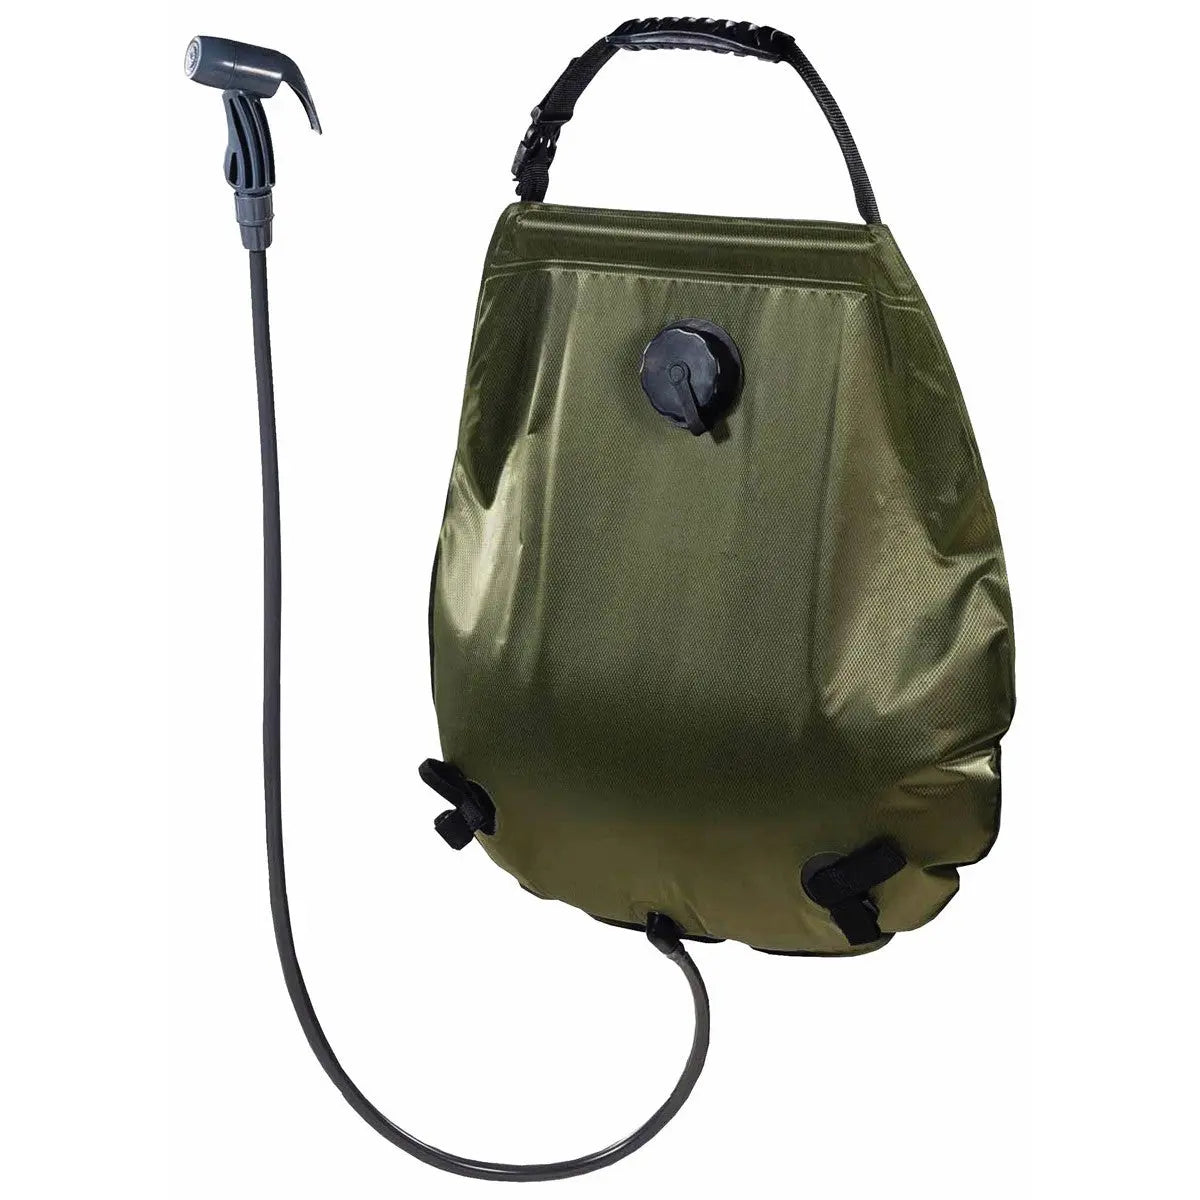 Solar shower, "Deluxe", 20 l, olive, with transport bag NSO Gear Solar Shower